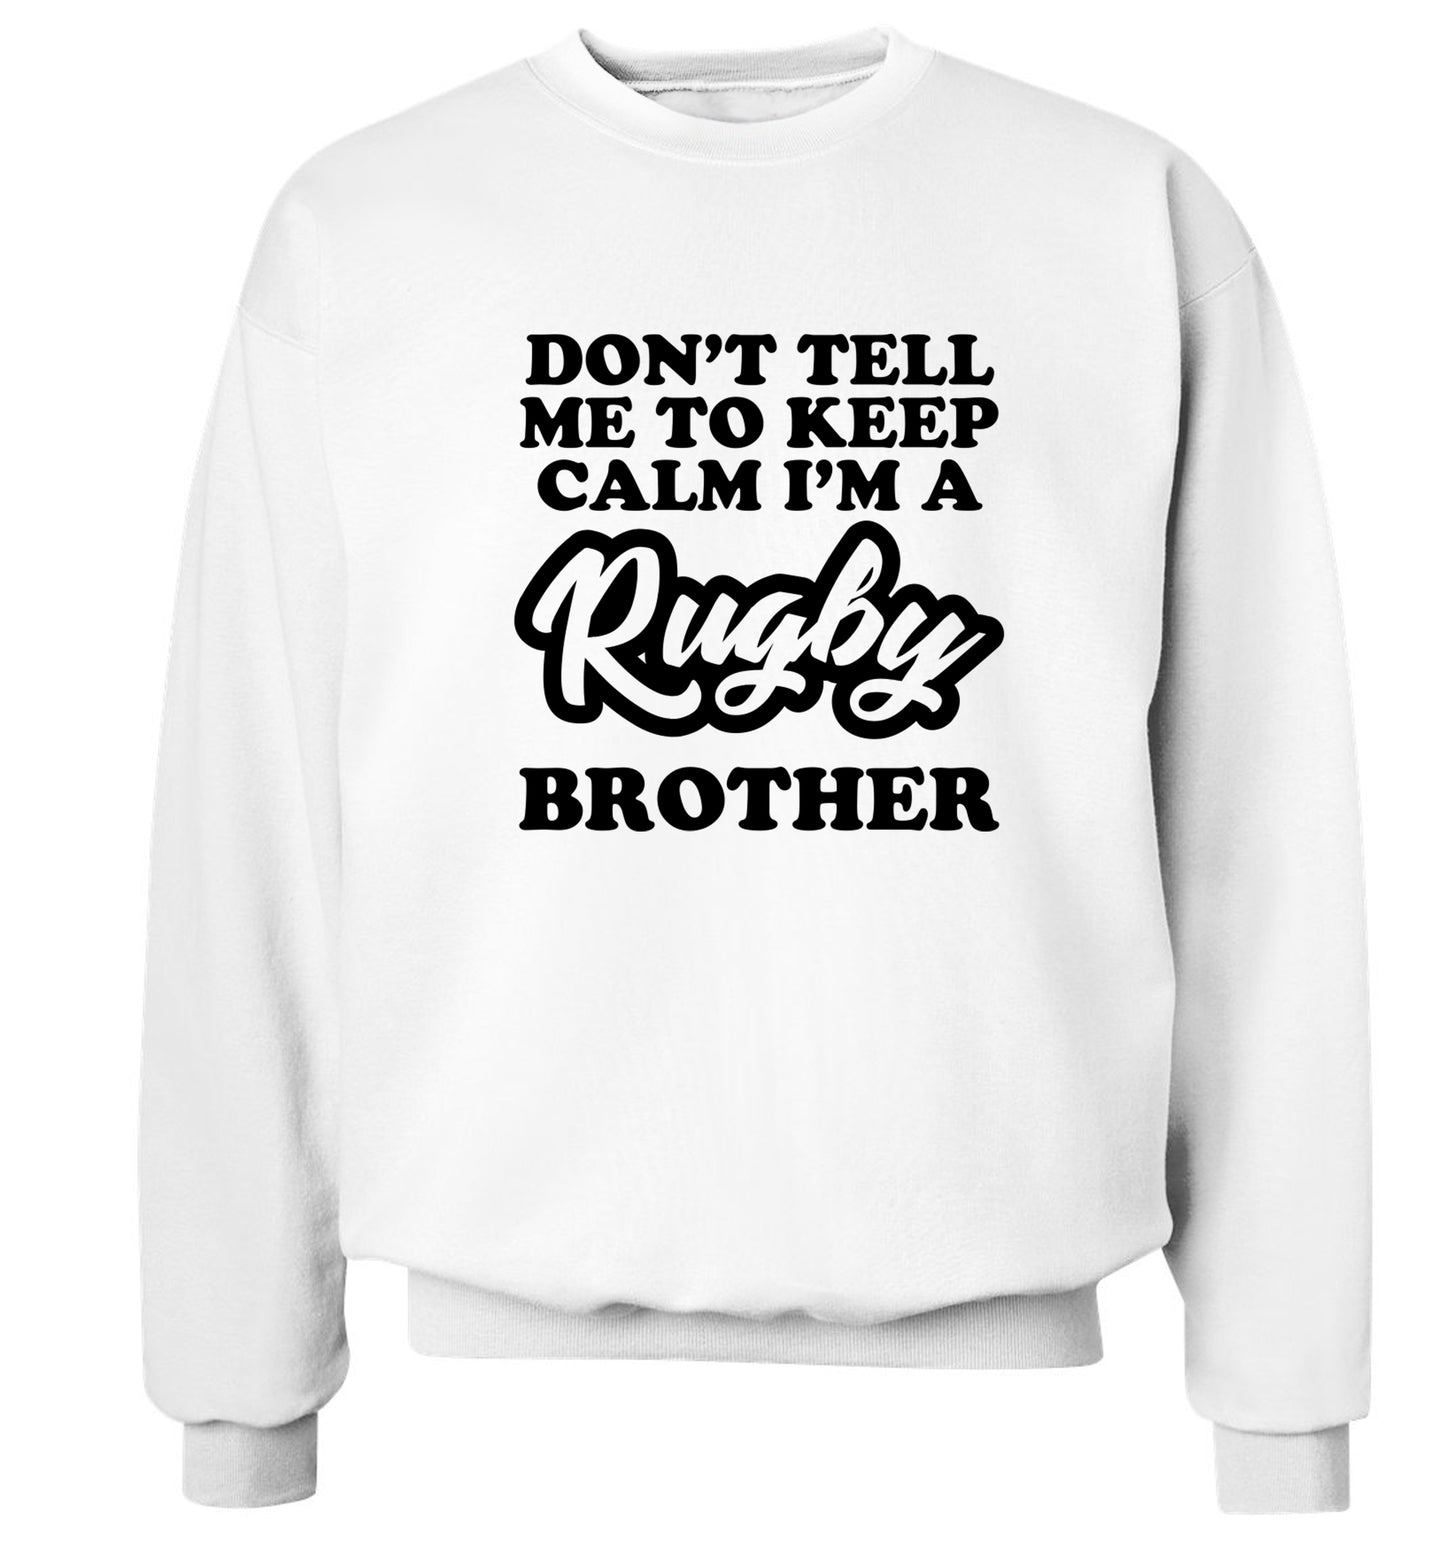 Don't tell me keep calm I'm a rugby brother Adult's unisex white Sweater 2XL